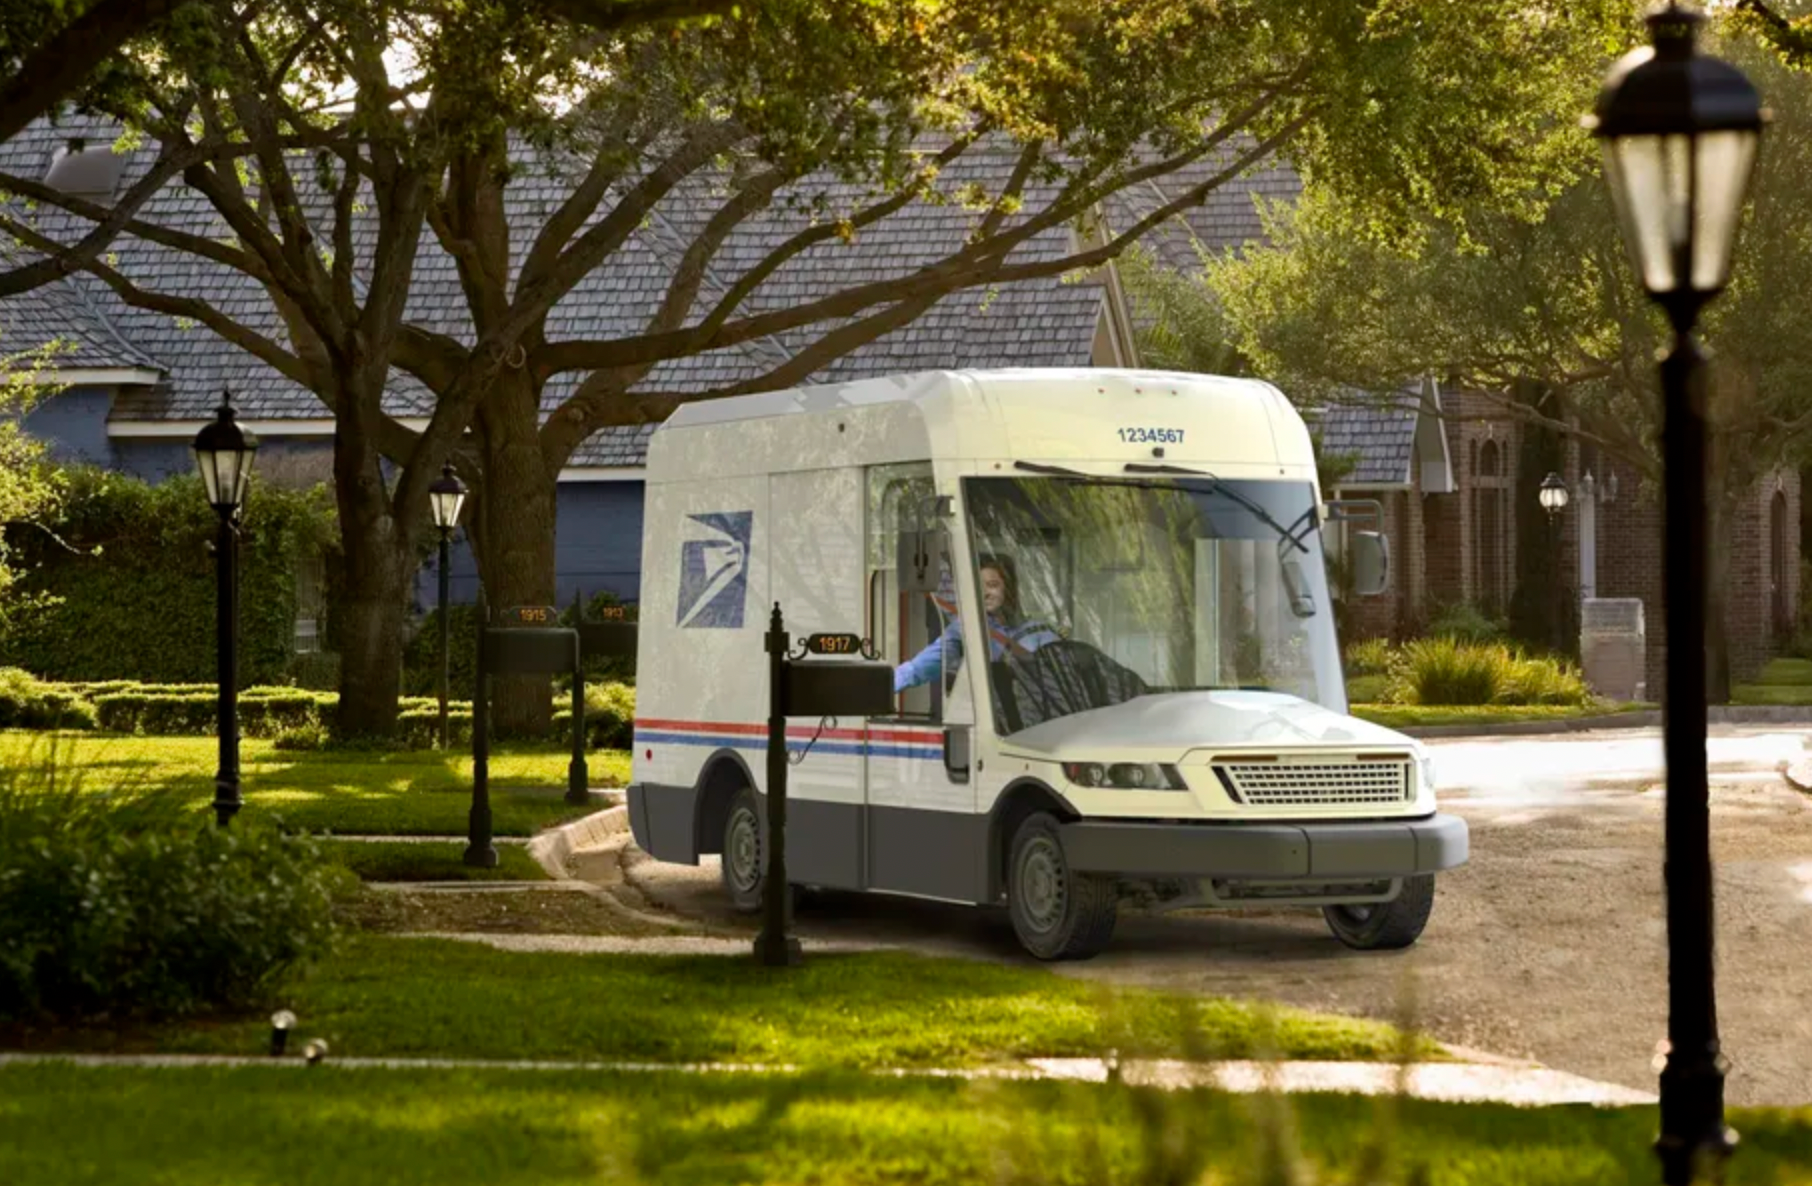 A photo shows an electric USPS delivery truck